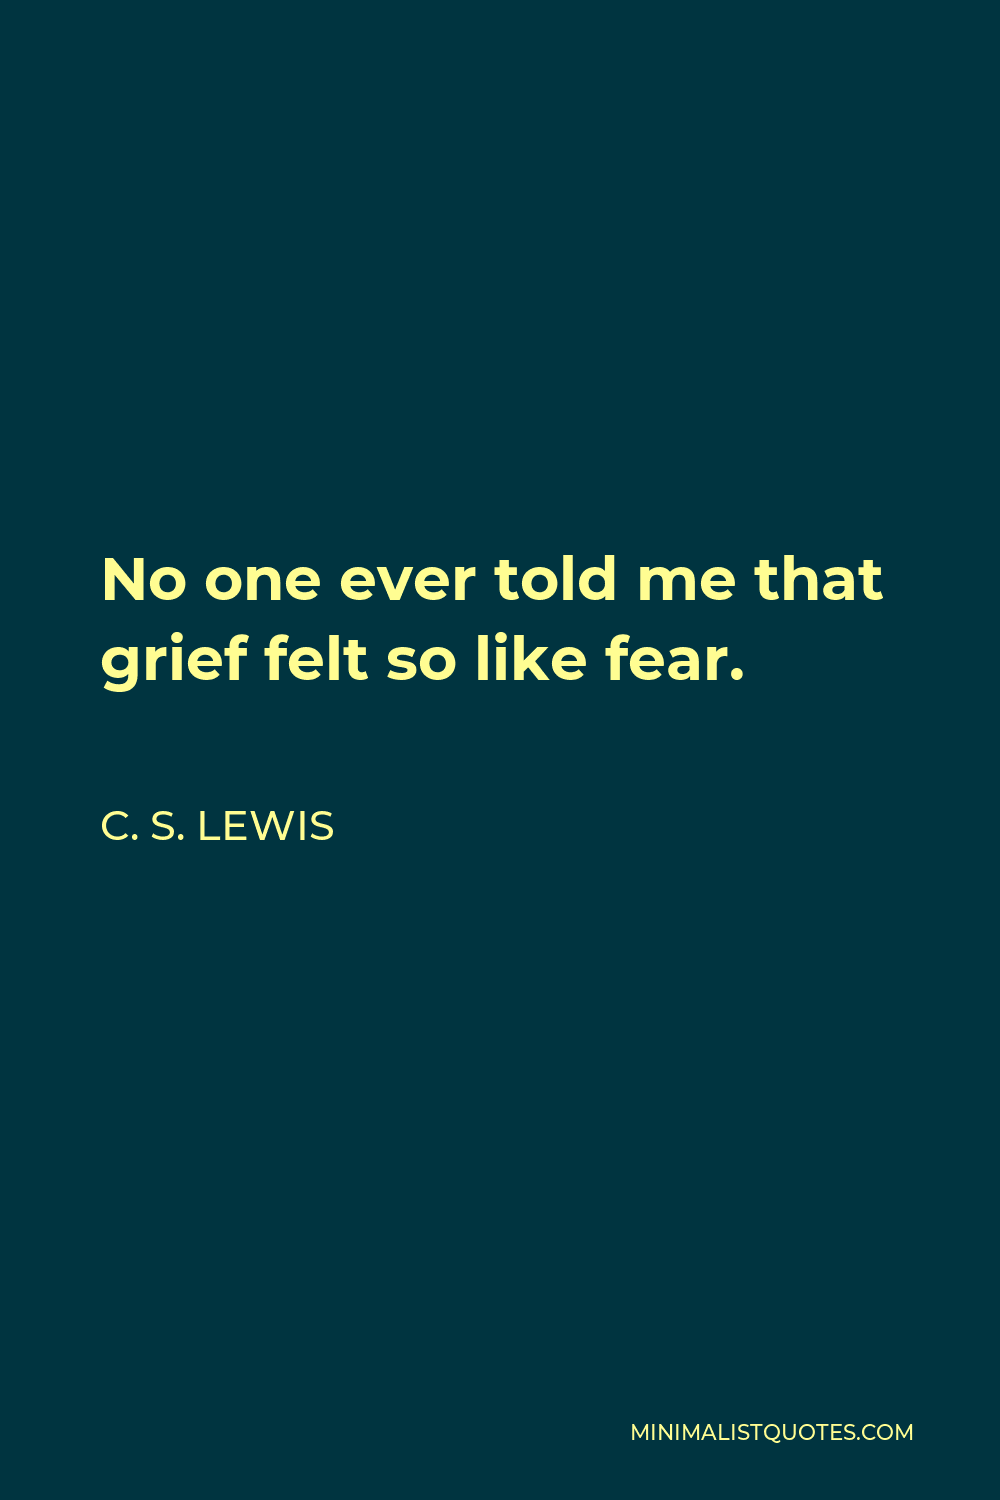 C. S. Lewis Quote - No one ever told me that grief felt so like fear.